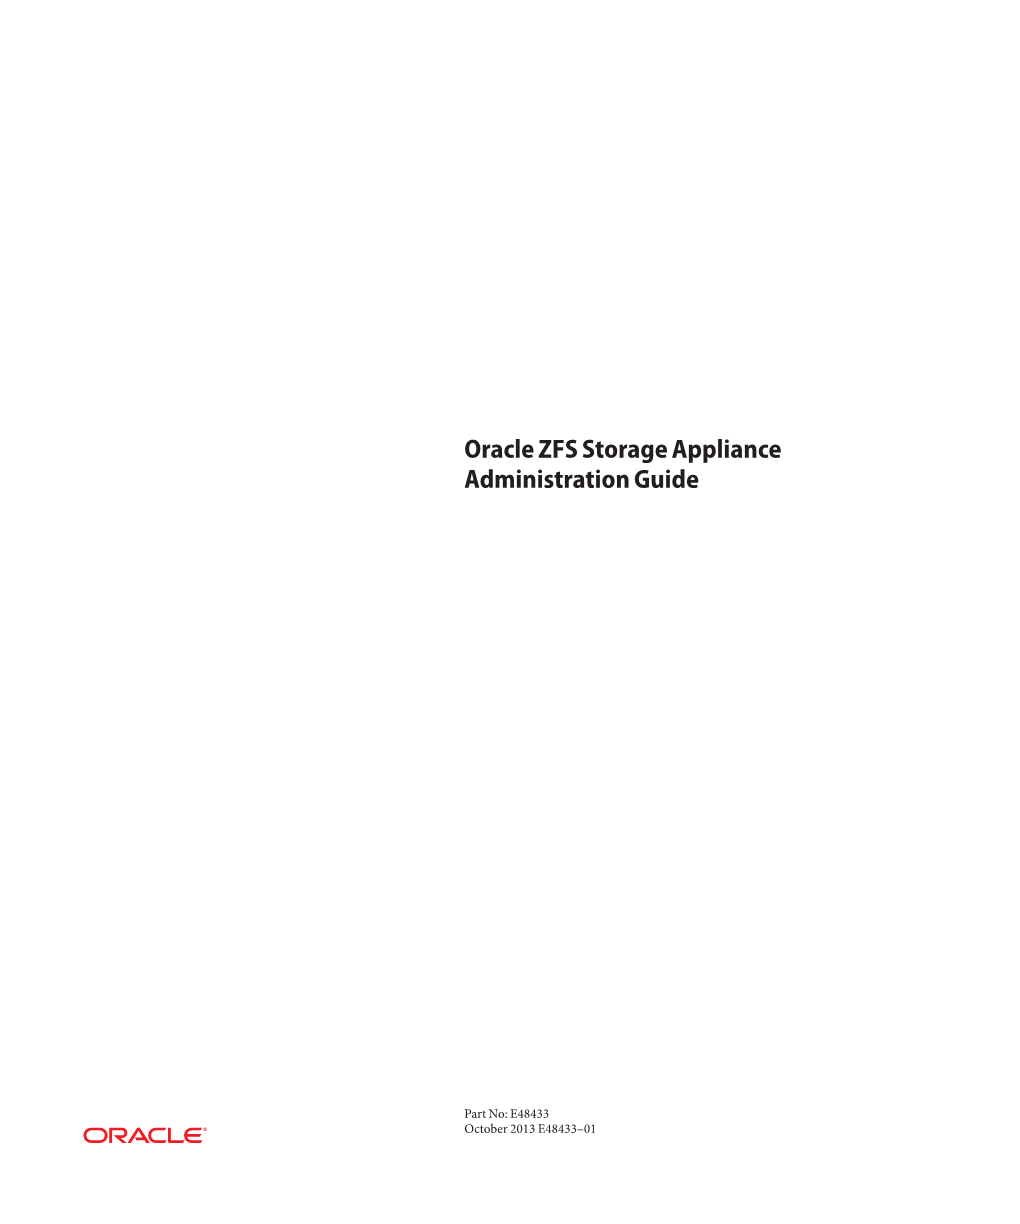 Oracle ZFS Storage Appliance Administration Guide